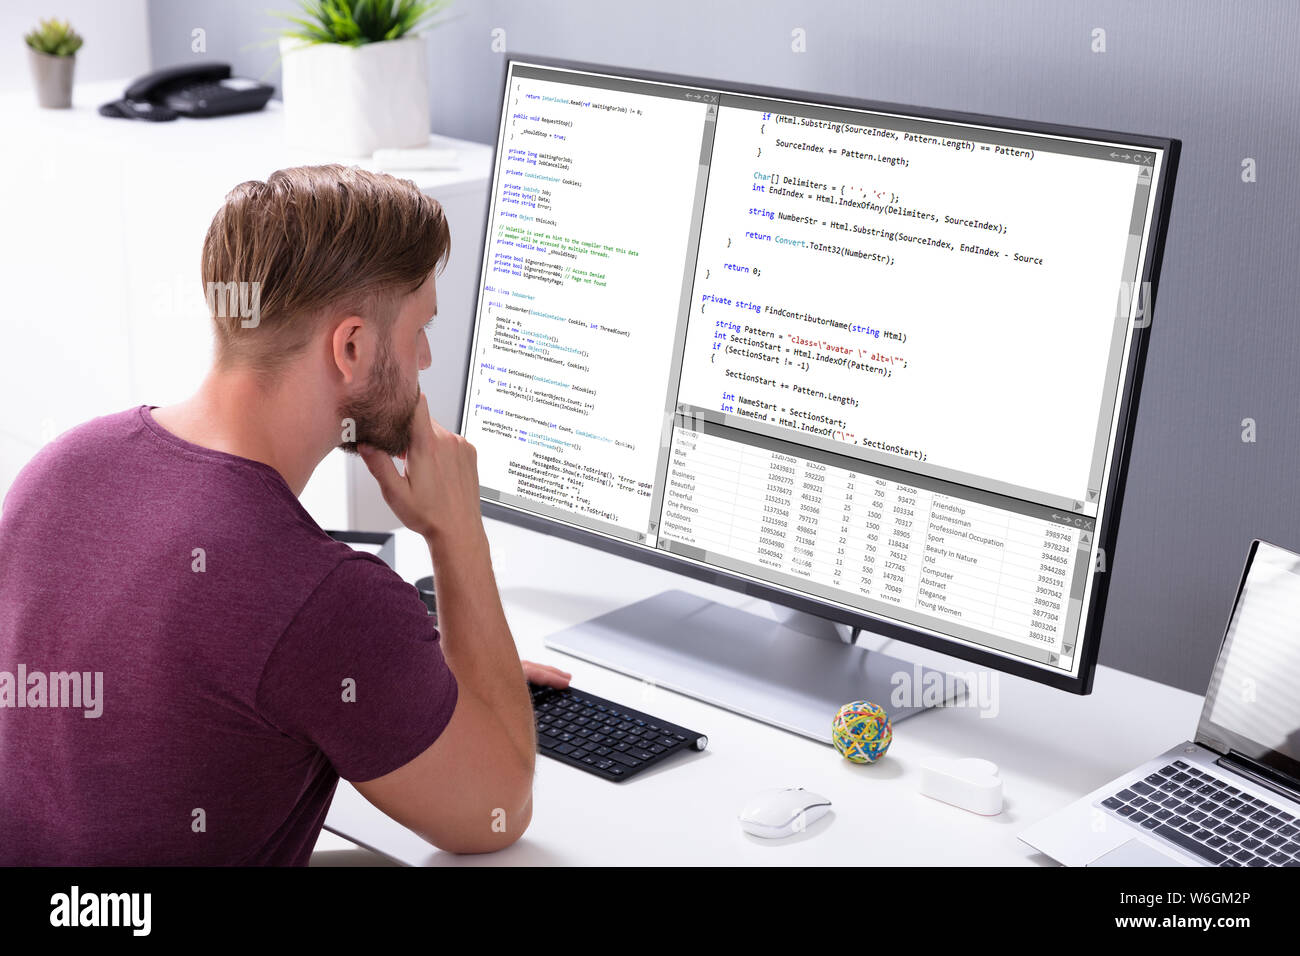 Man Programming Code On Computer In Office Stock Photo